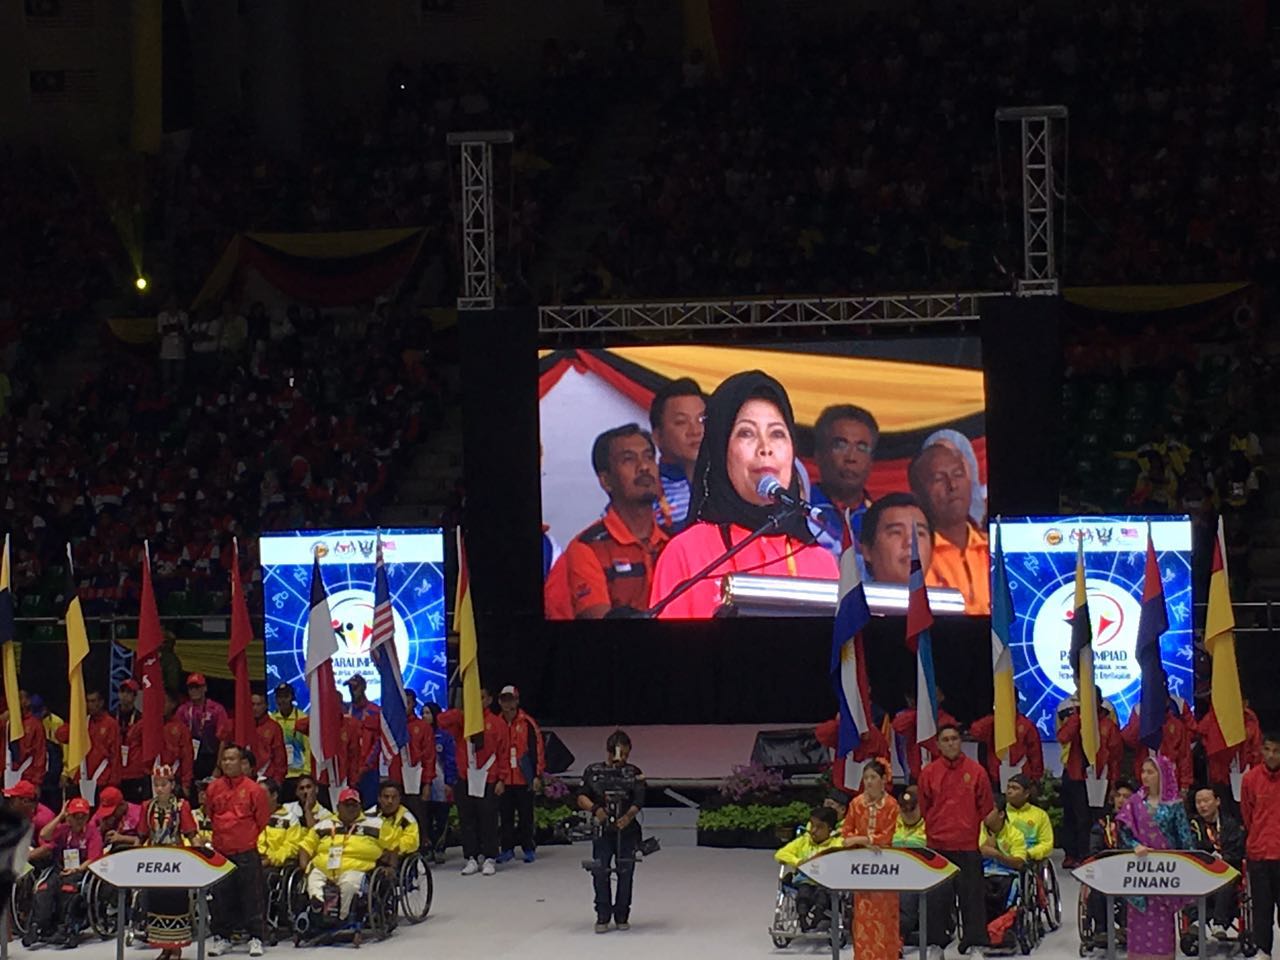 Fatimah during her speech at the opening ceremony.